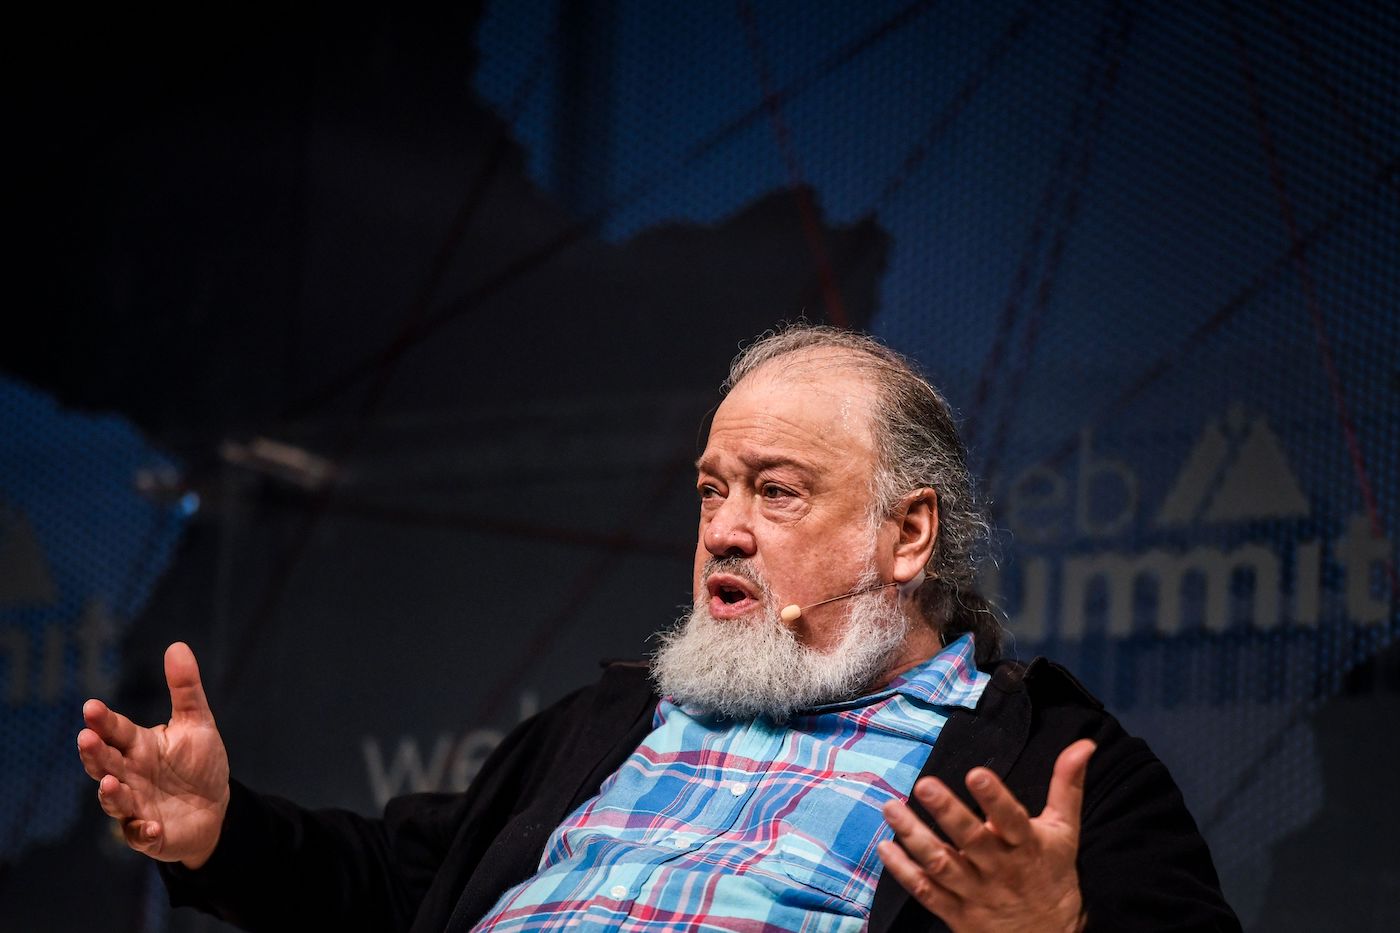 Founder and CEO of the privacy protecting transaction platform Elixxir David Chaum holds a conference on the impact of tech on our privacy, during the Web Summit in Lisbon on November 6, 2019. - Europe's largest tech event Web Summit is held at Parque das Nacoes in Lisbon from November 4 to November 7. (Photo by PATRICIA DE MELO MOREIRA / AFP) (Photo by PATRICIA DE MELO MOREIRA/AFP /AFP via Getty Images)